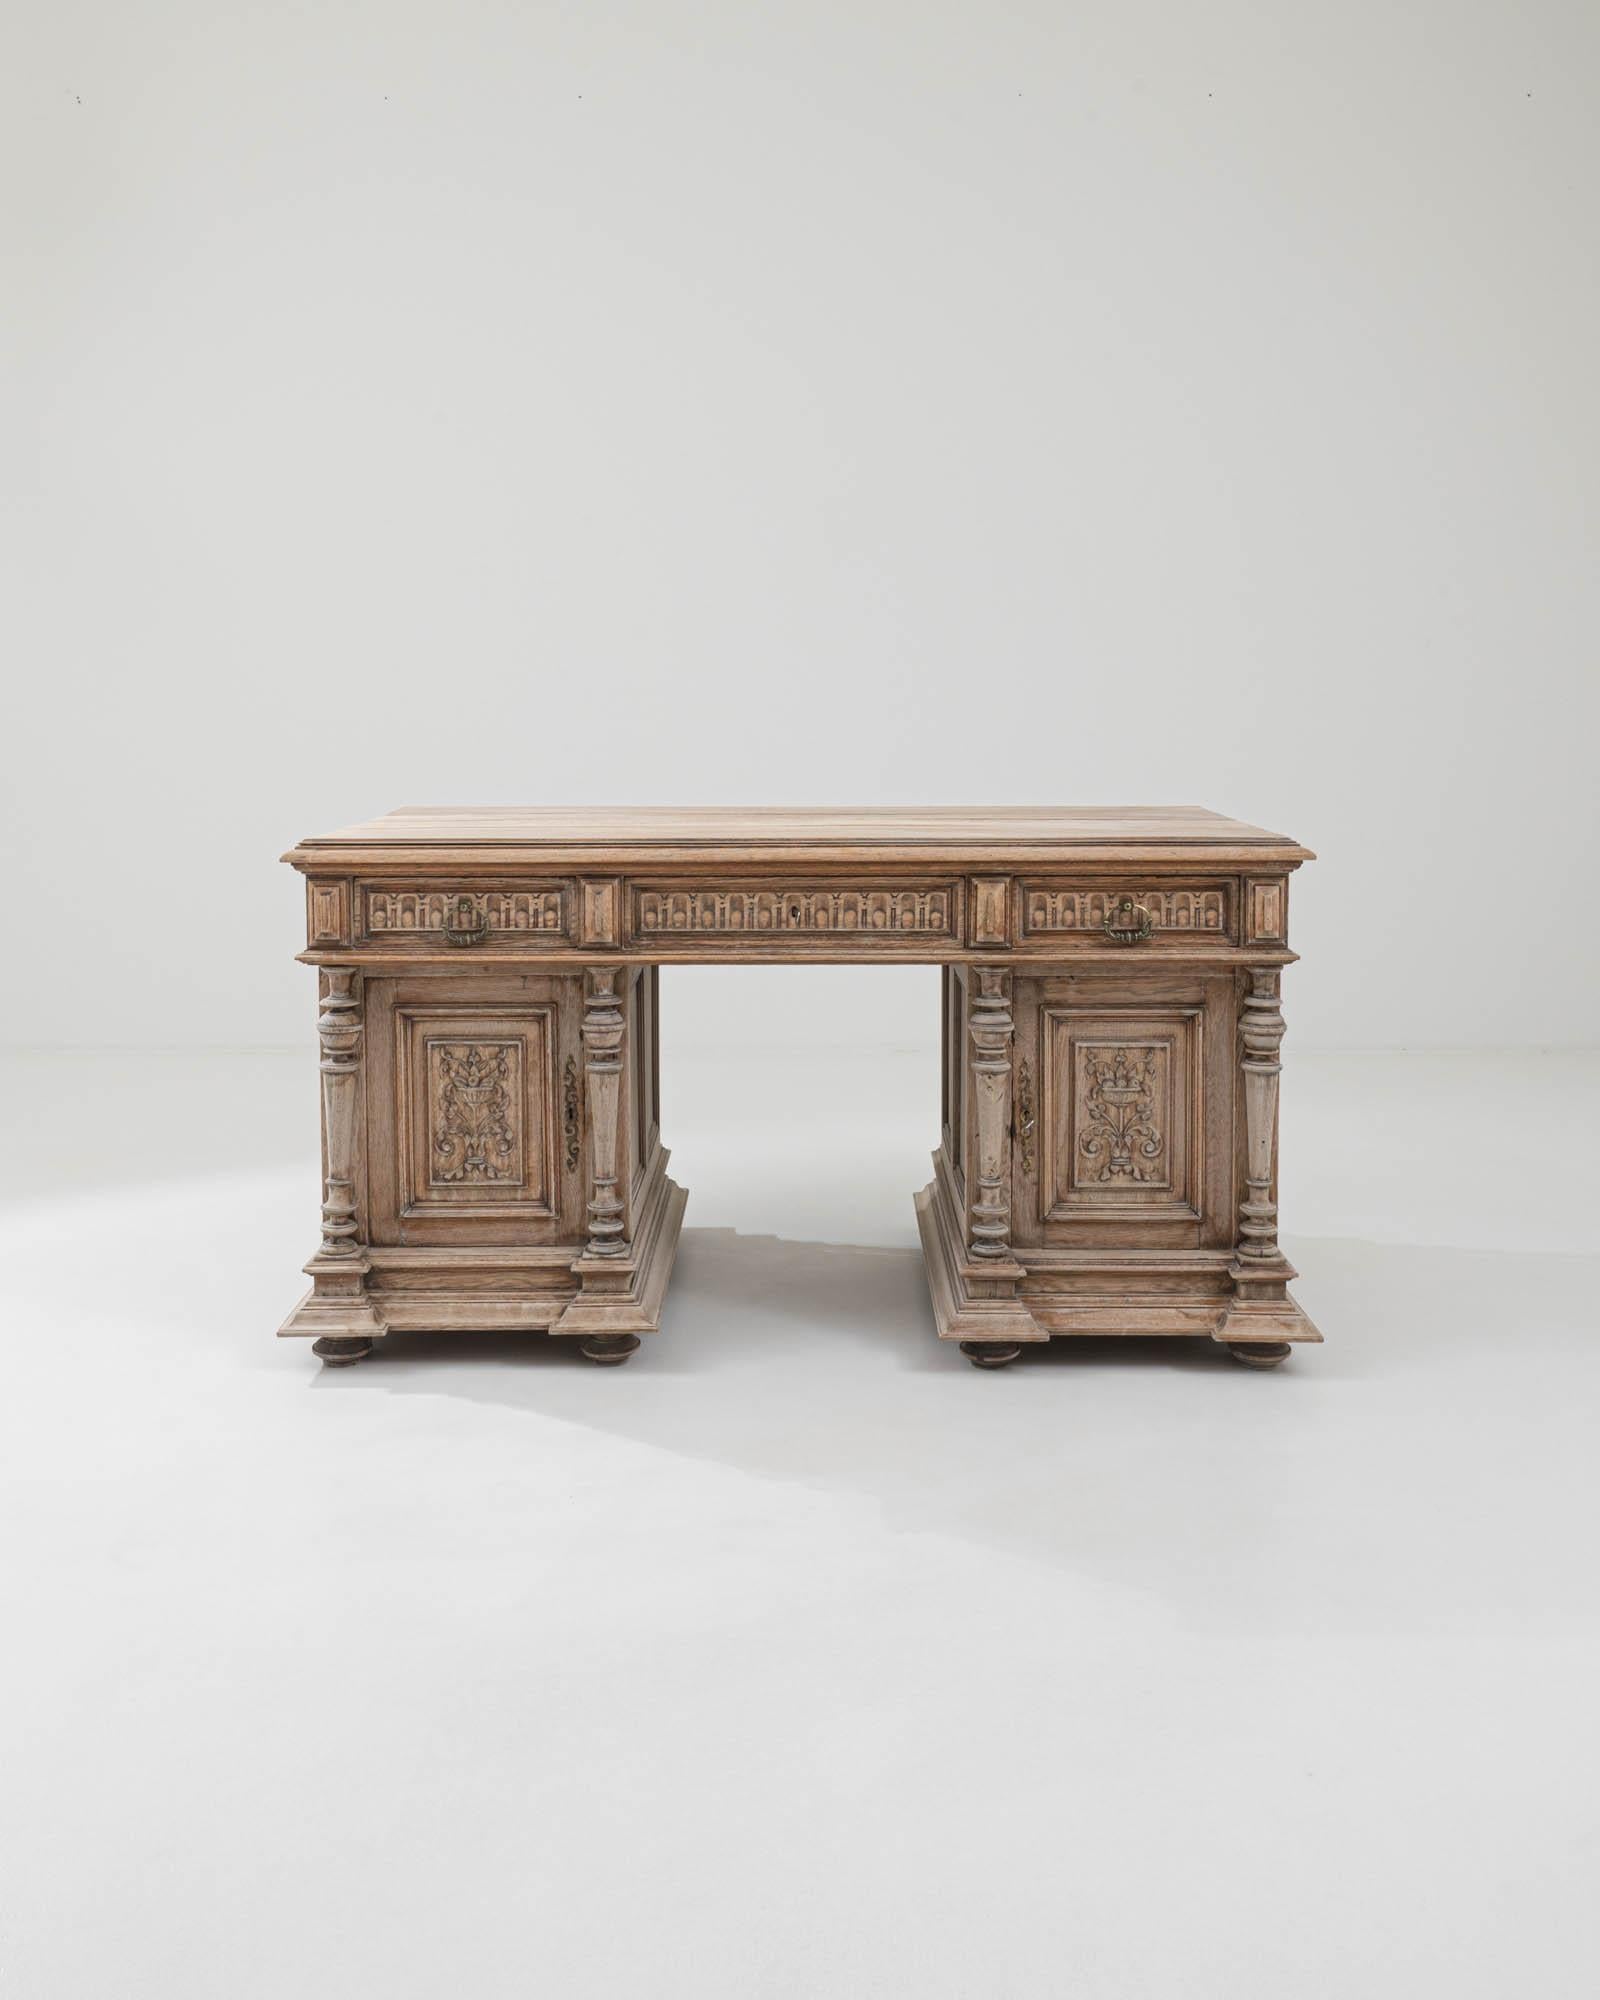 This Neo-Renaissance oak writing desk has a timeless air of magnificence. Built in Belgium at the turn of the century, the aesthetic harks back to the solid, ornate furniture of Renaissance palaces and villas — while the stationary drawers and